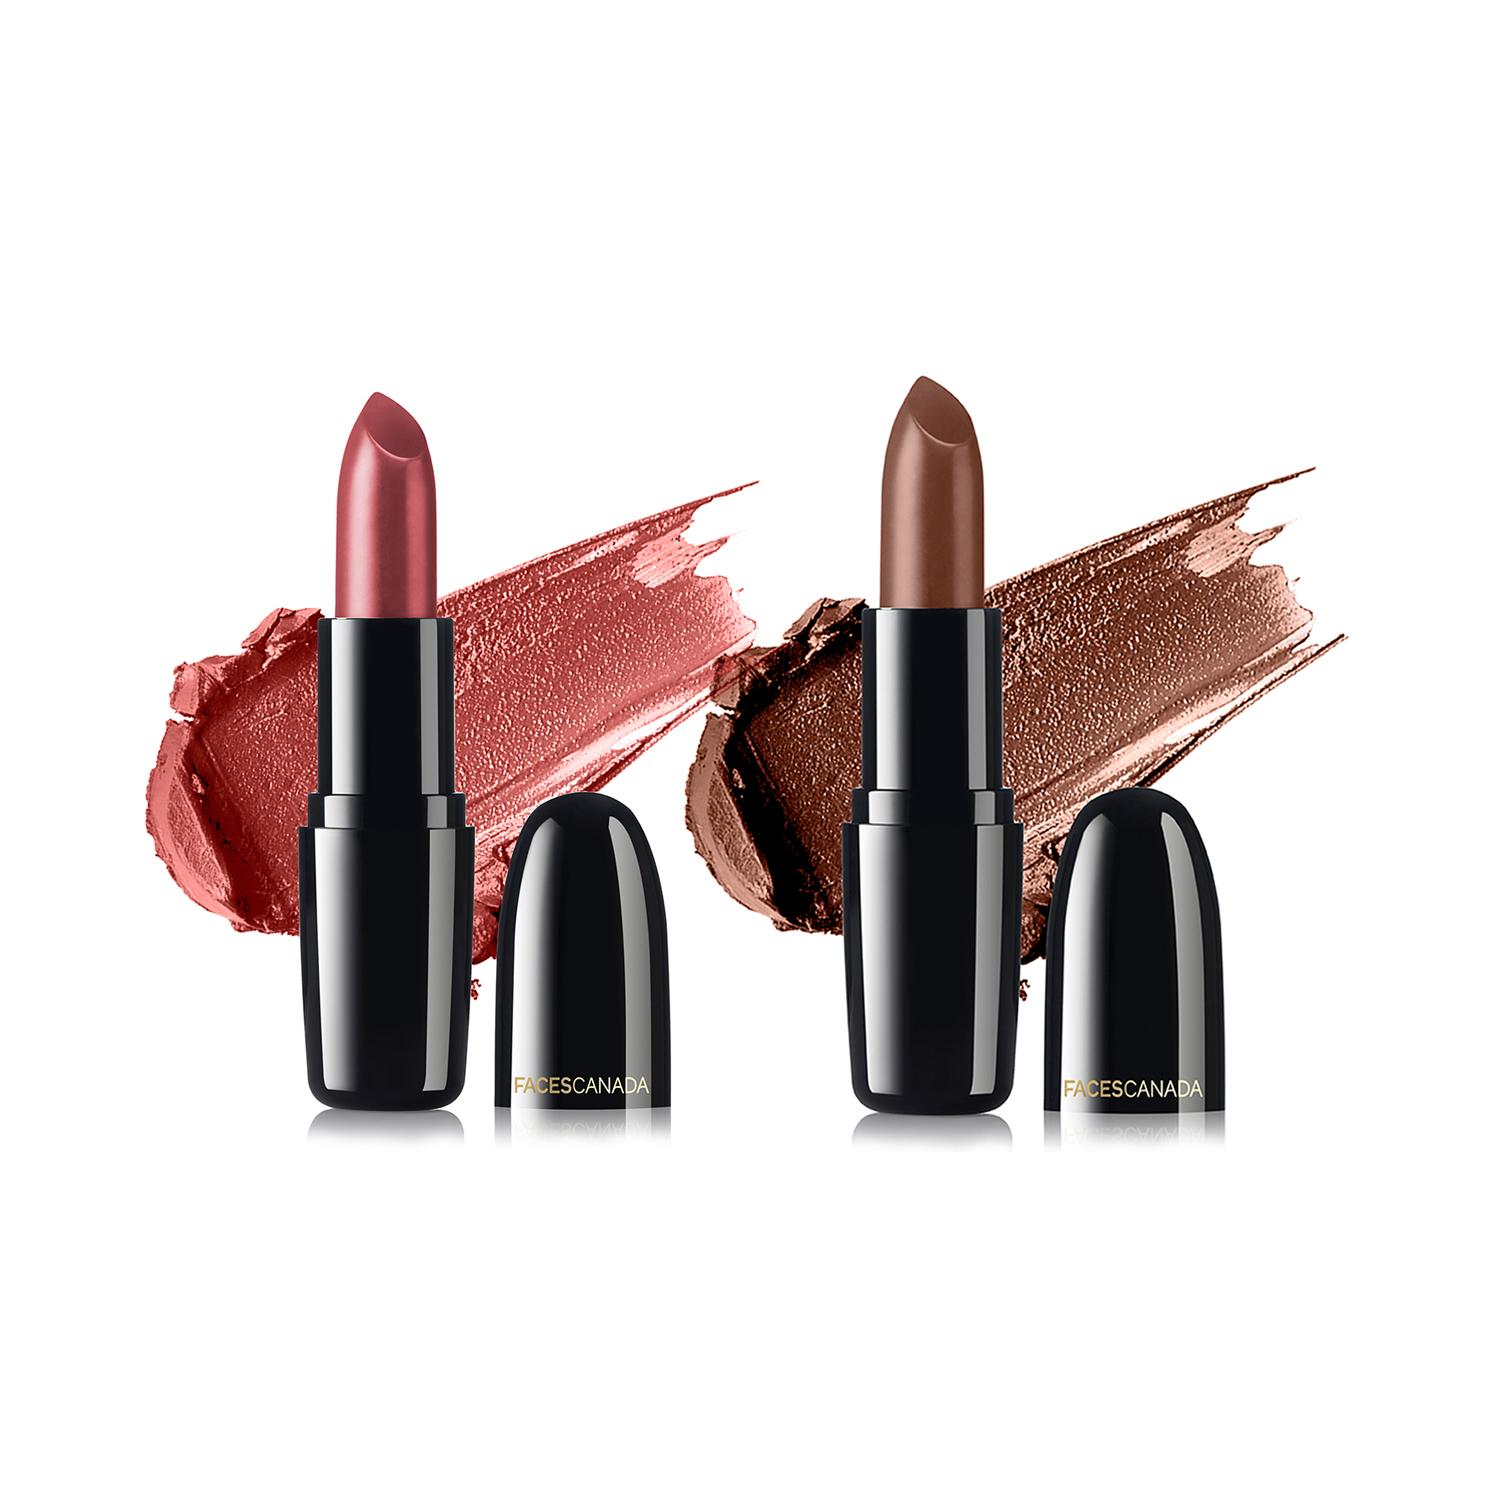 Faces Canada | Faces Canada Festive Pout - Weightless Creme Finish Lipstick Pack of 2 - Summer Ready & Dark Cocoa